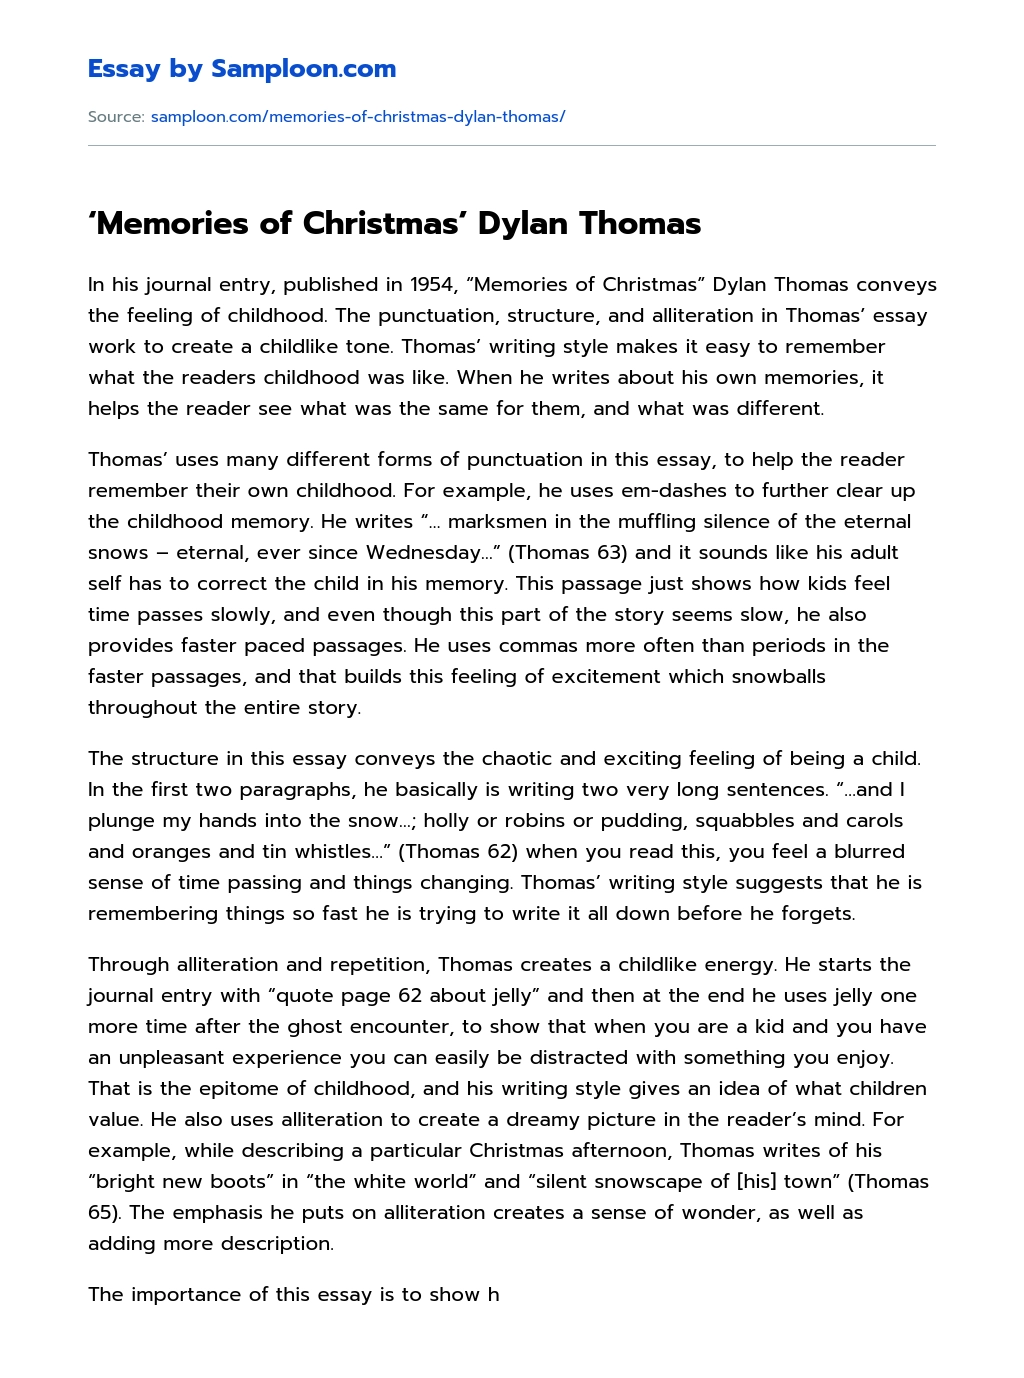 Memories of Christmas’ Dylan Thomas Analytical Essay essay